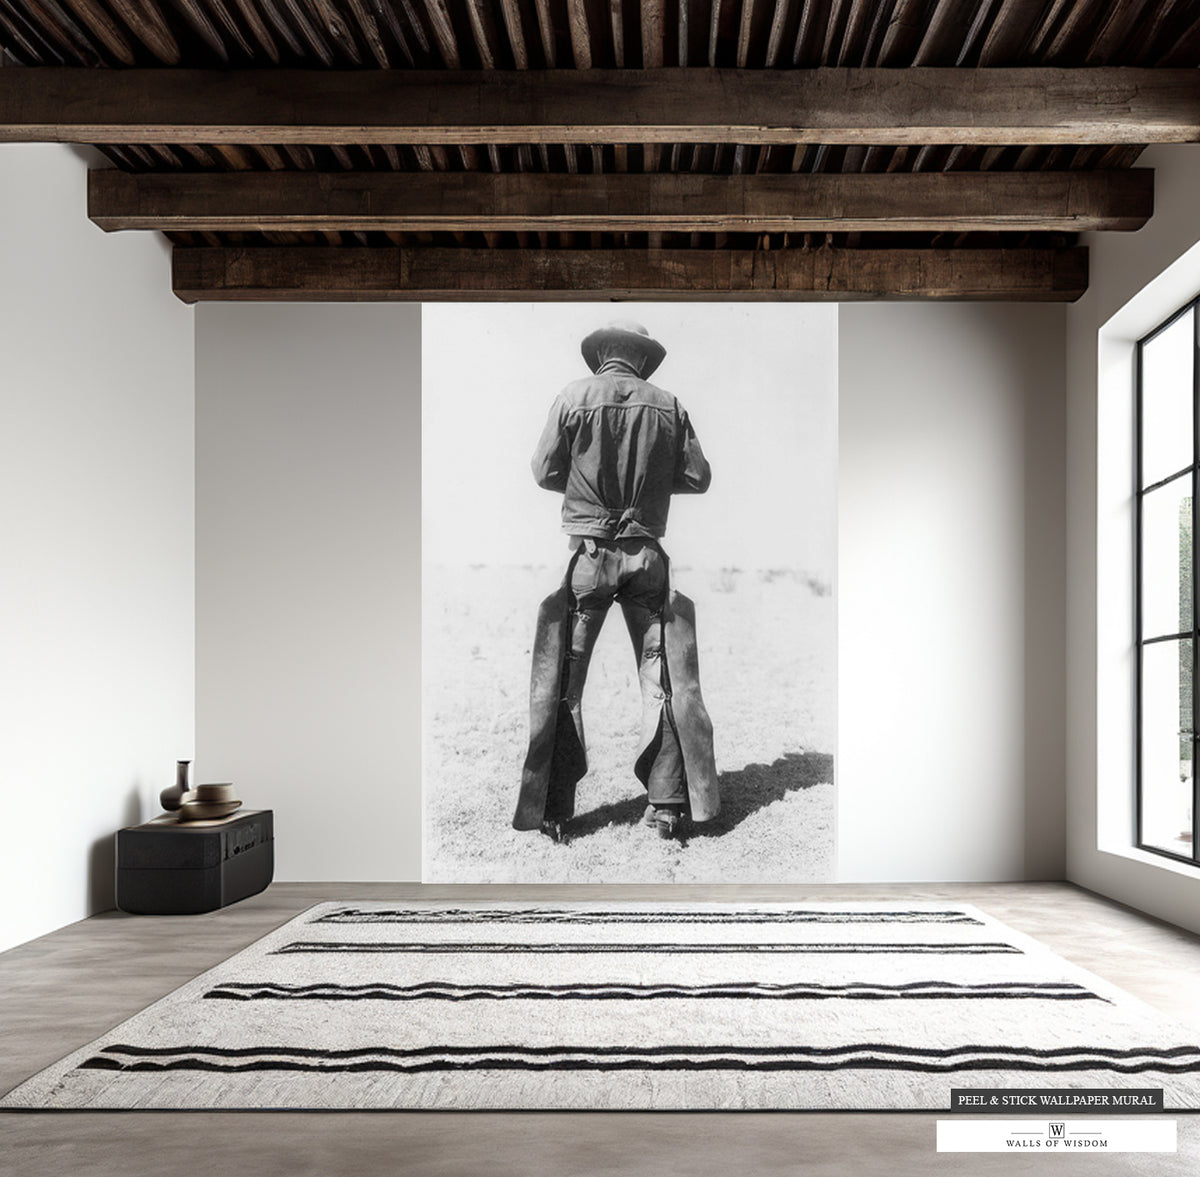 Texas Cowboy in Chaps Wallpaper Mural capturing the essence of Western heritage.